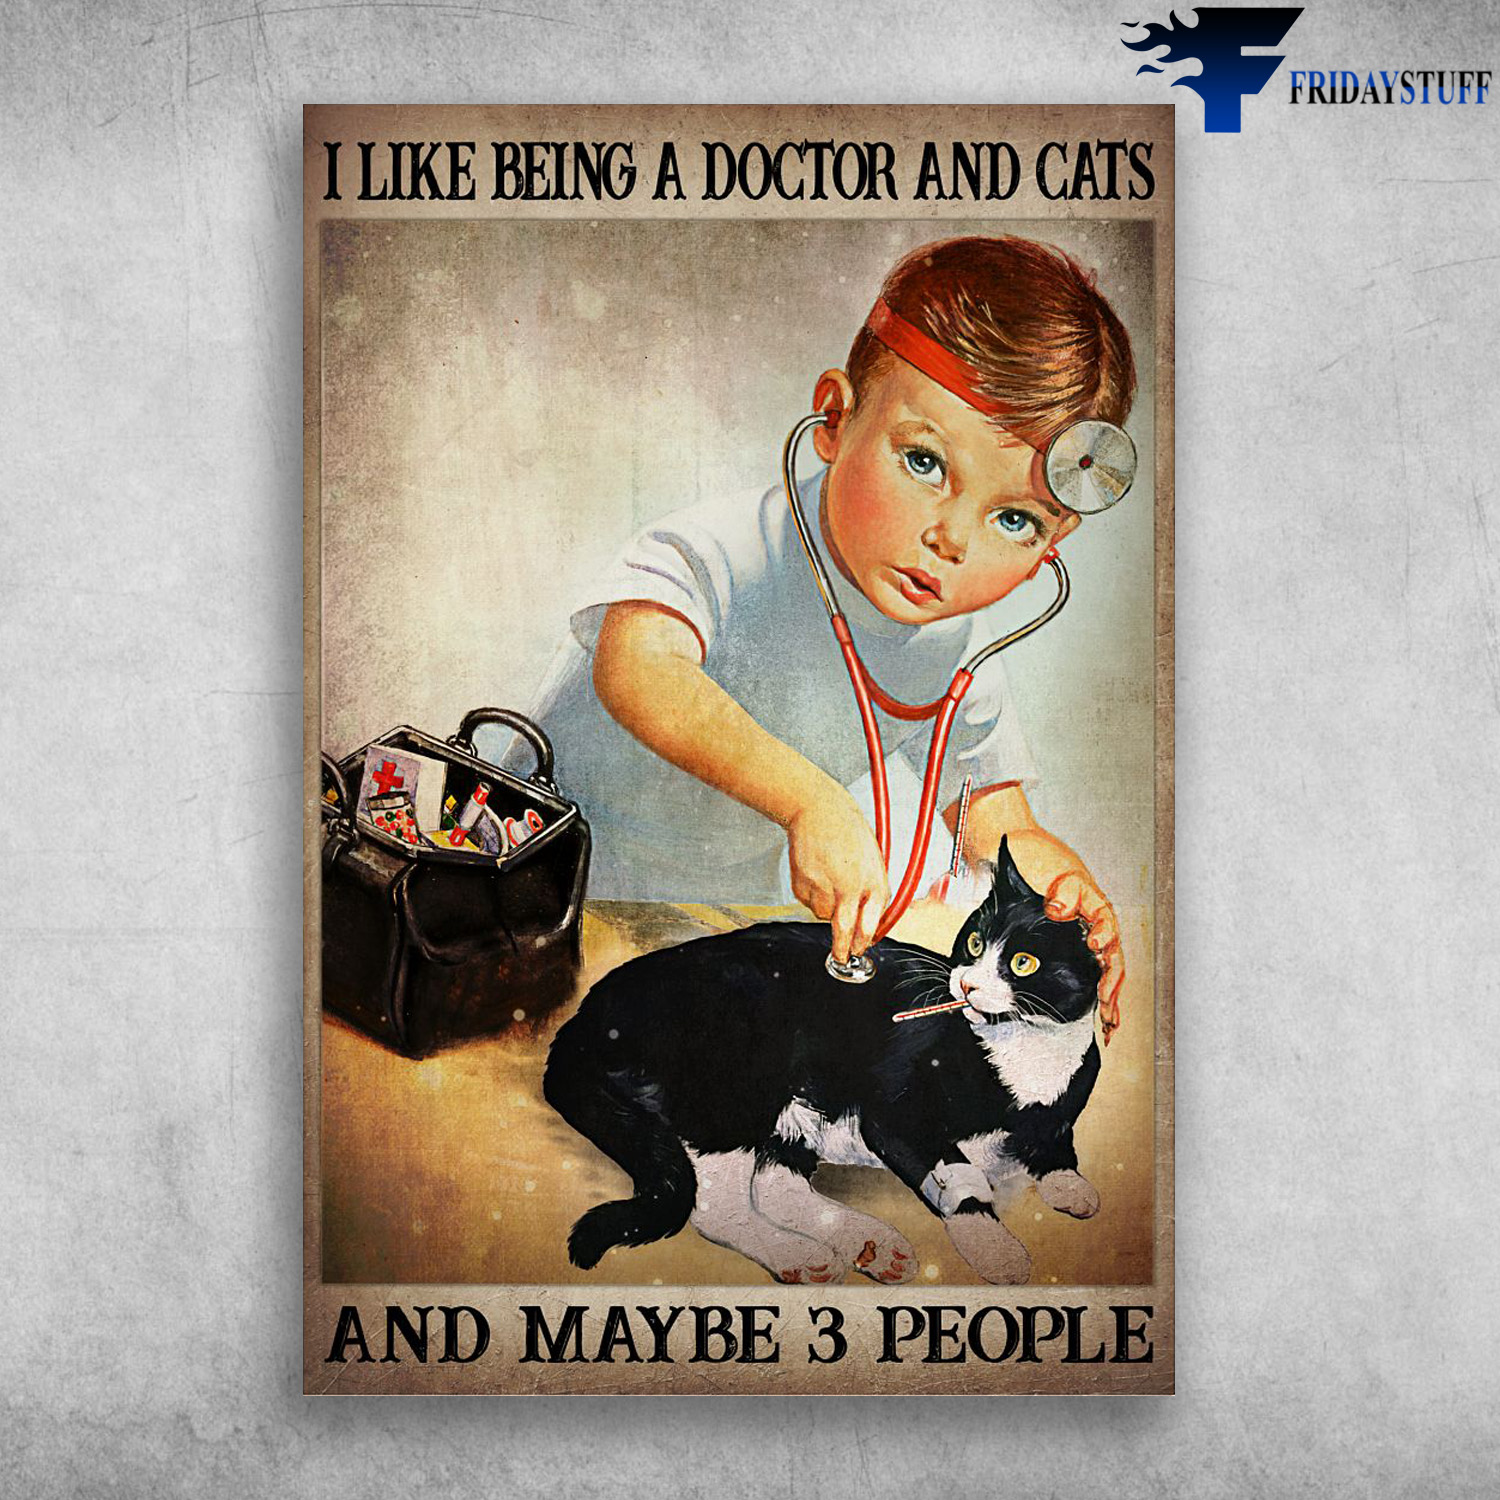 Boy Doctor And Cat - I Like Being A Doctor And Cats, And Maybe 3 People